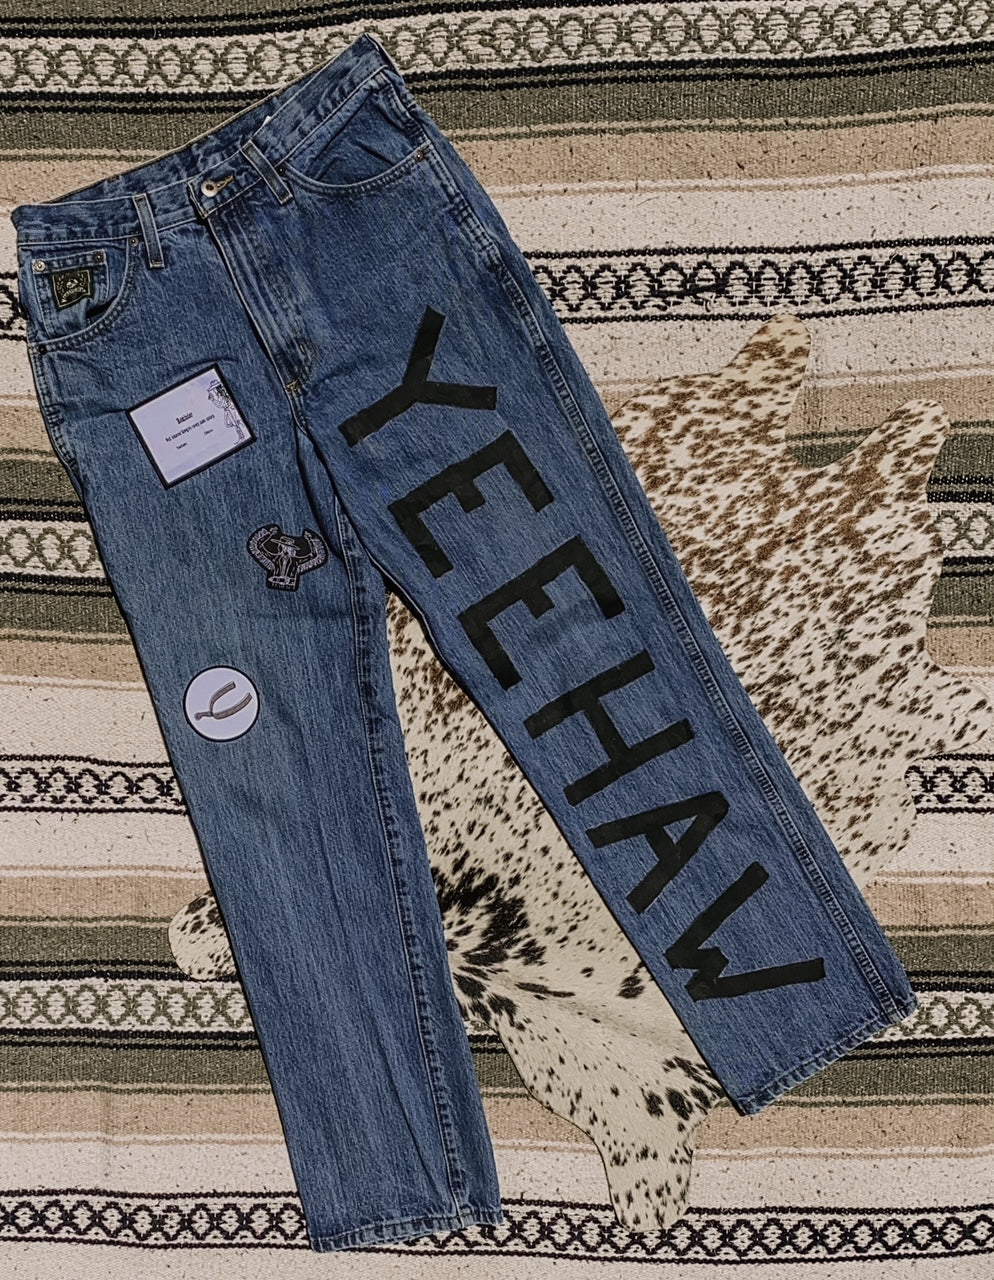 Yeehaw Jeans w/ Patches – Risin' Shine Cwgrl Co.